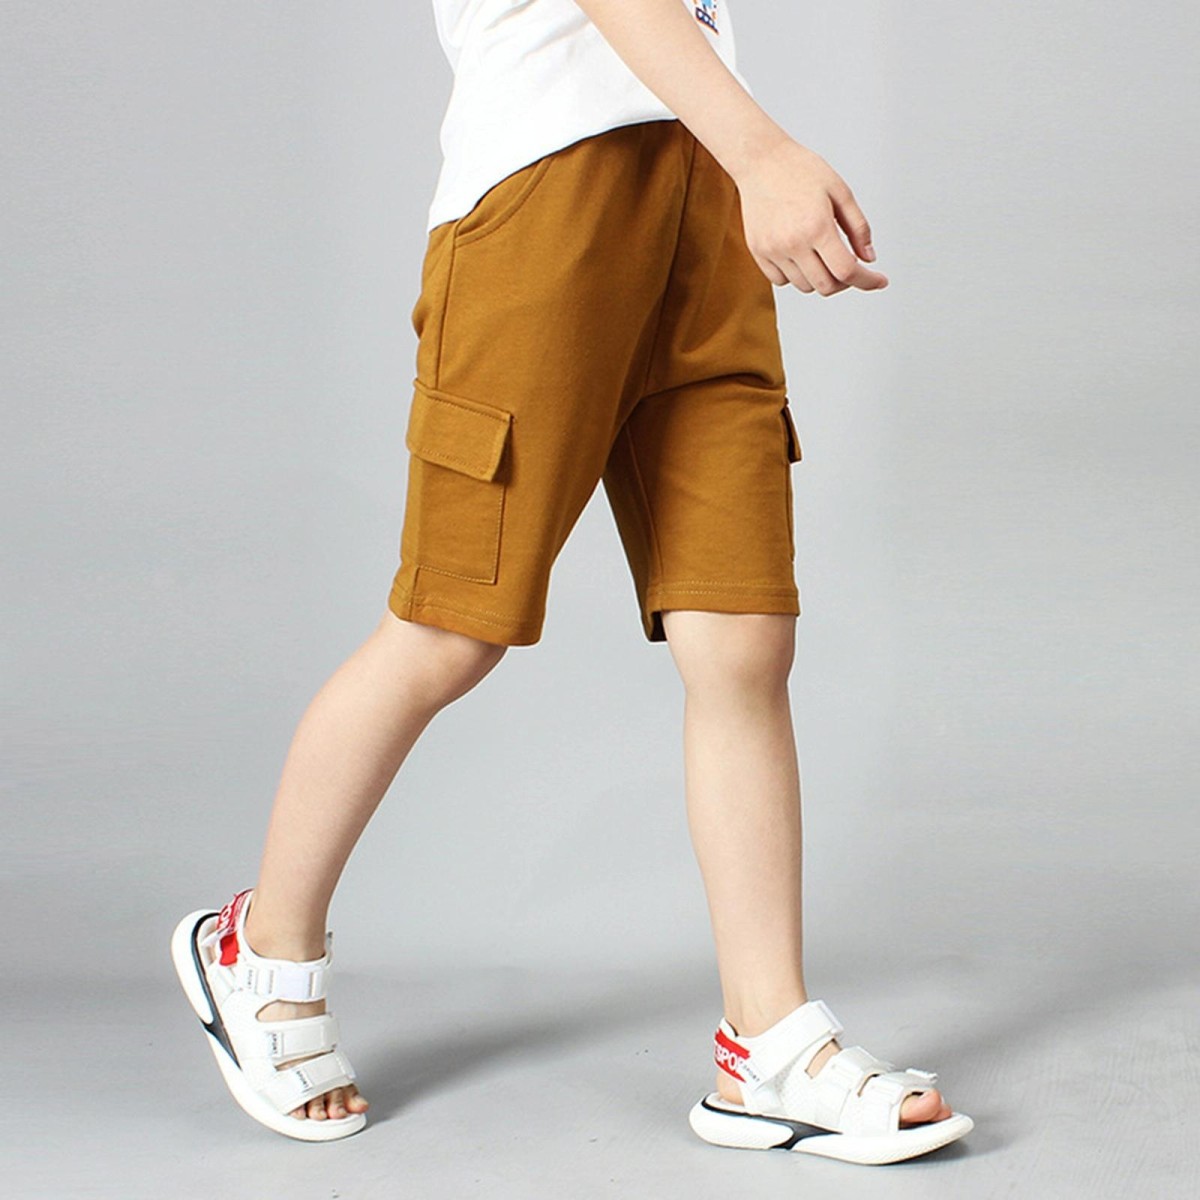 Boys Cotton Casual Overalls Shorts (Color:Chocolate Size:160cm)